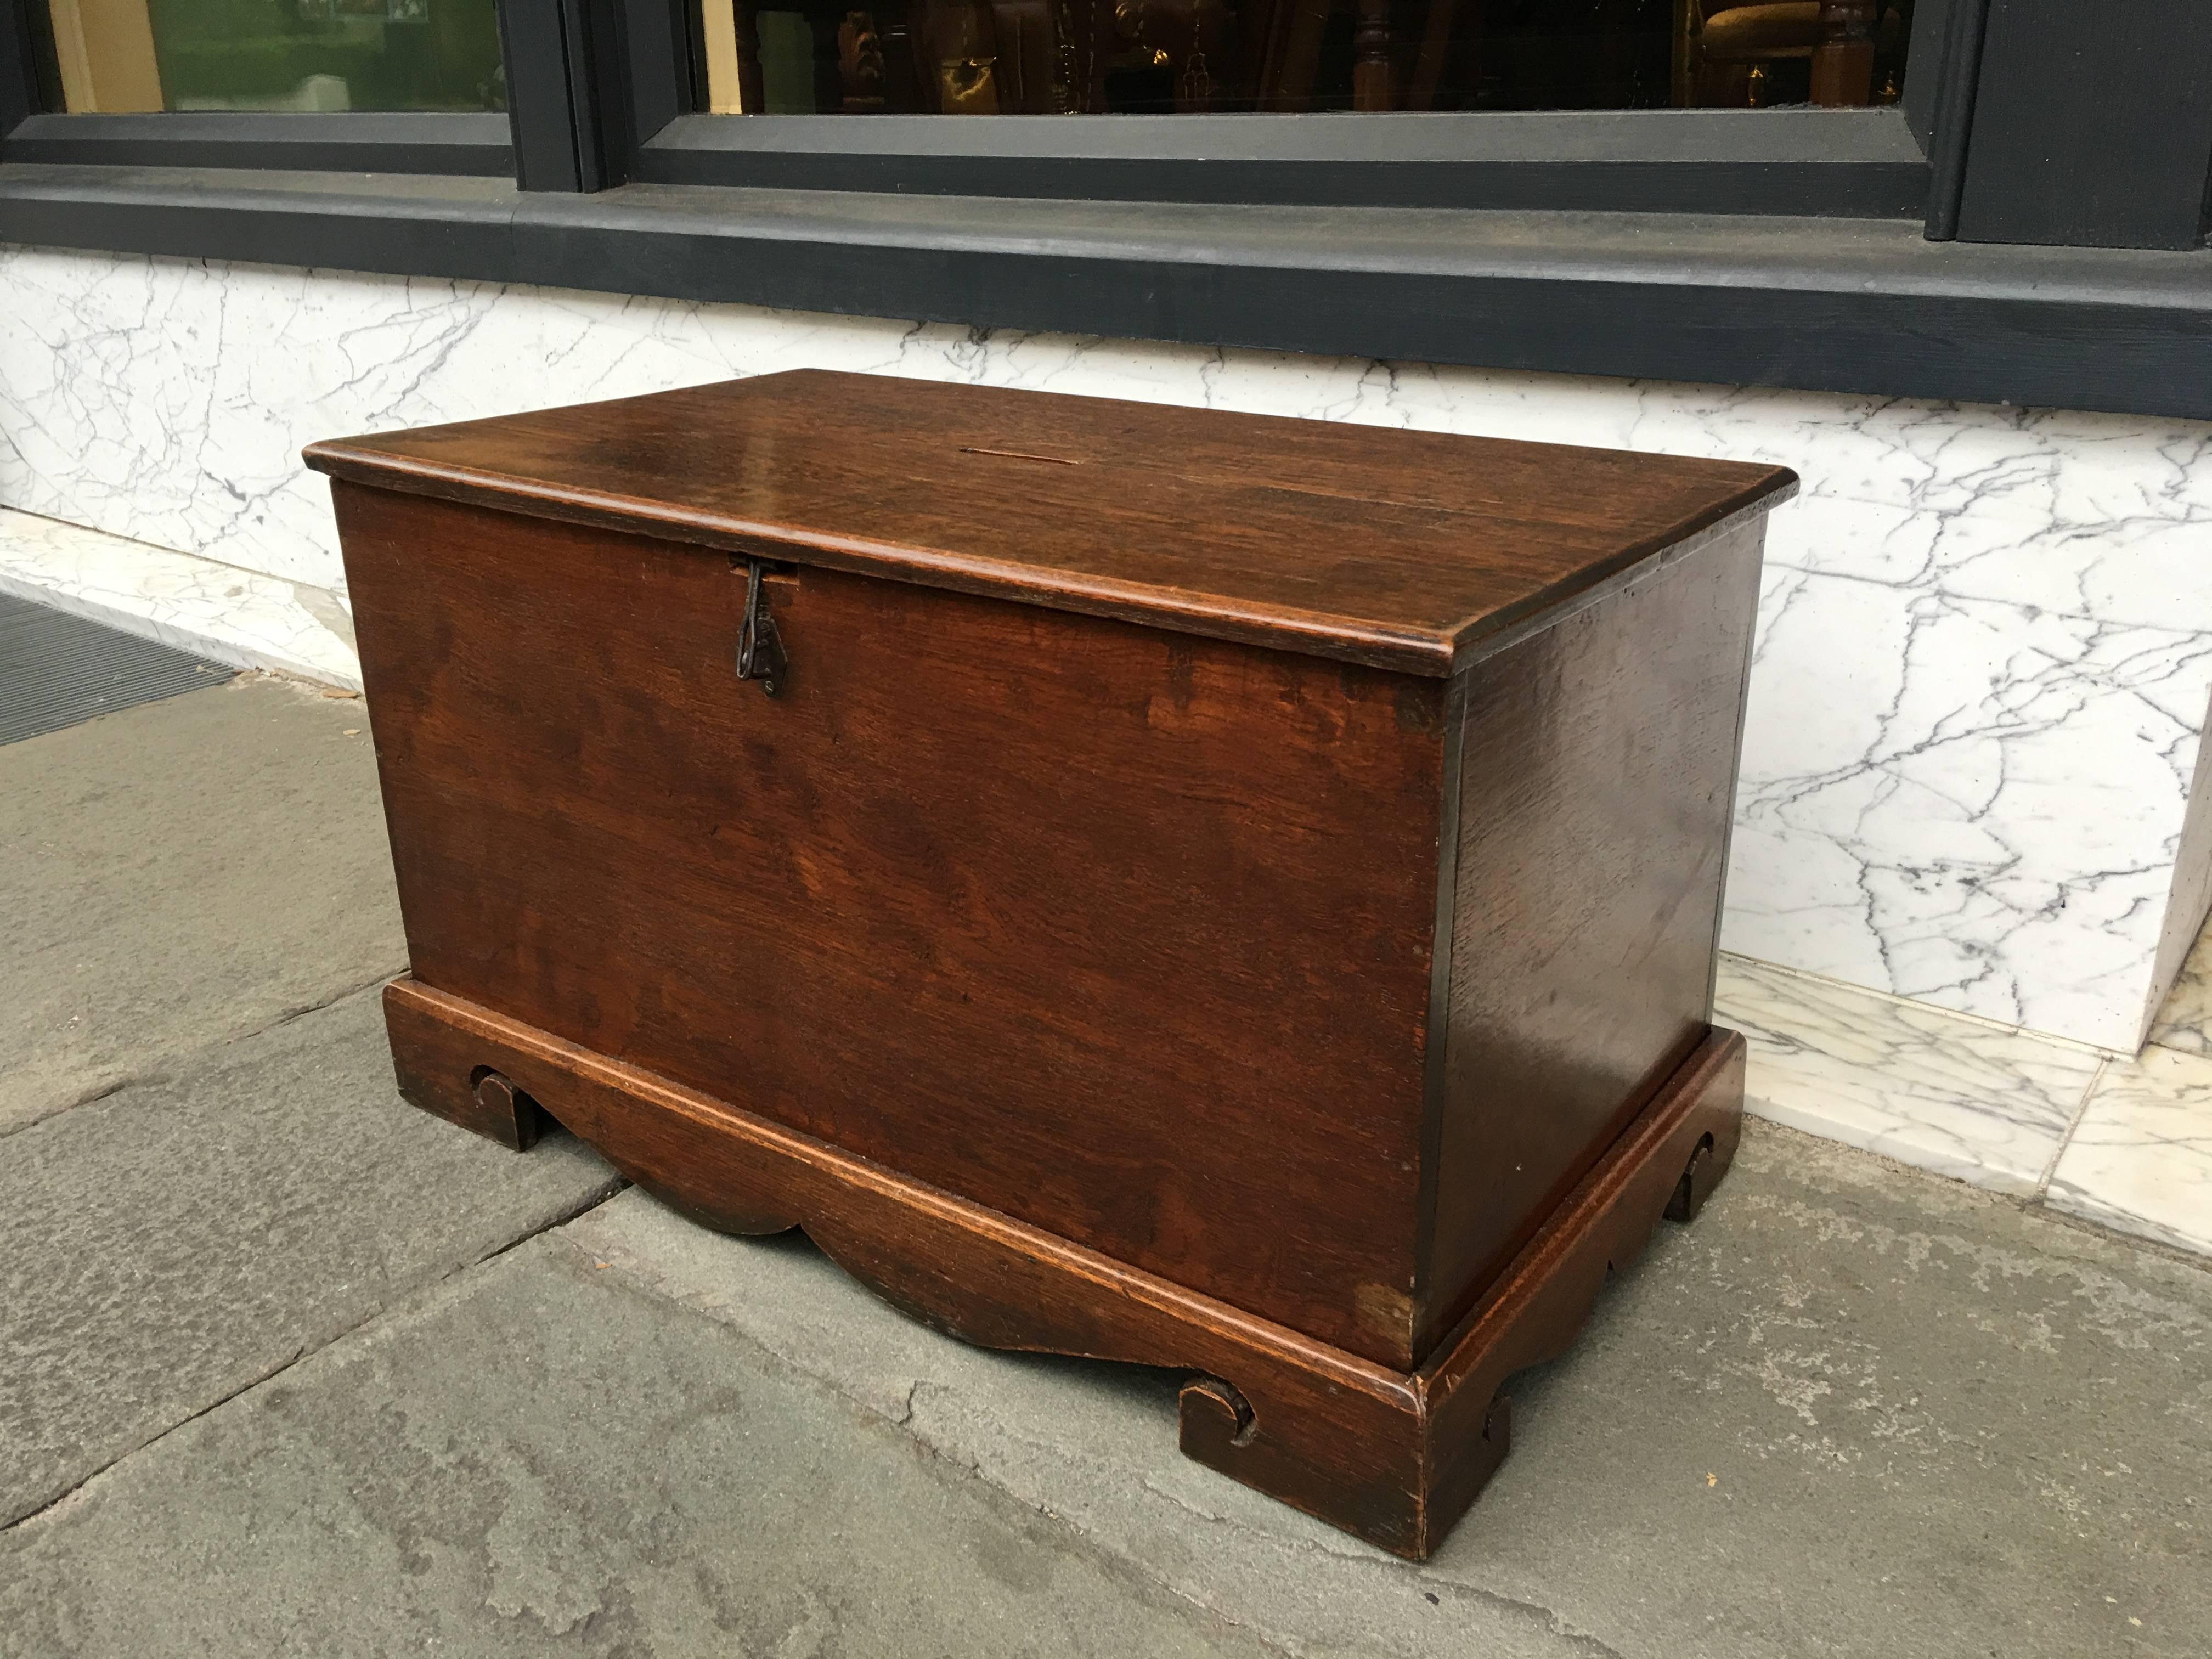 Small late 19th century box with top slot to deposit money. Nicely carved bracket foot base.